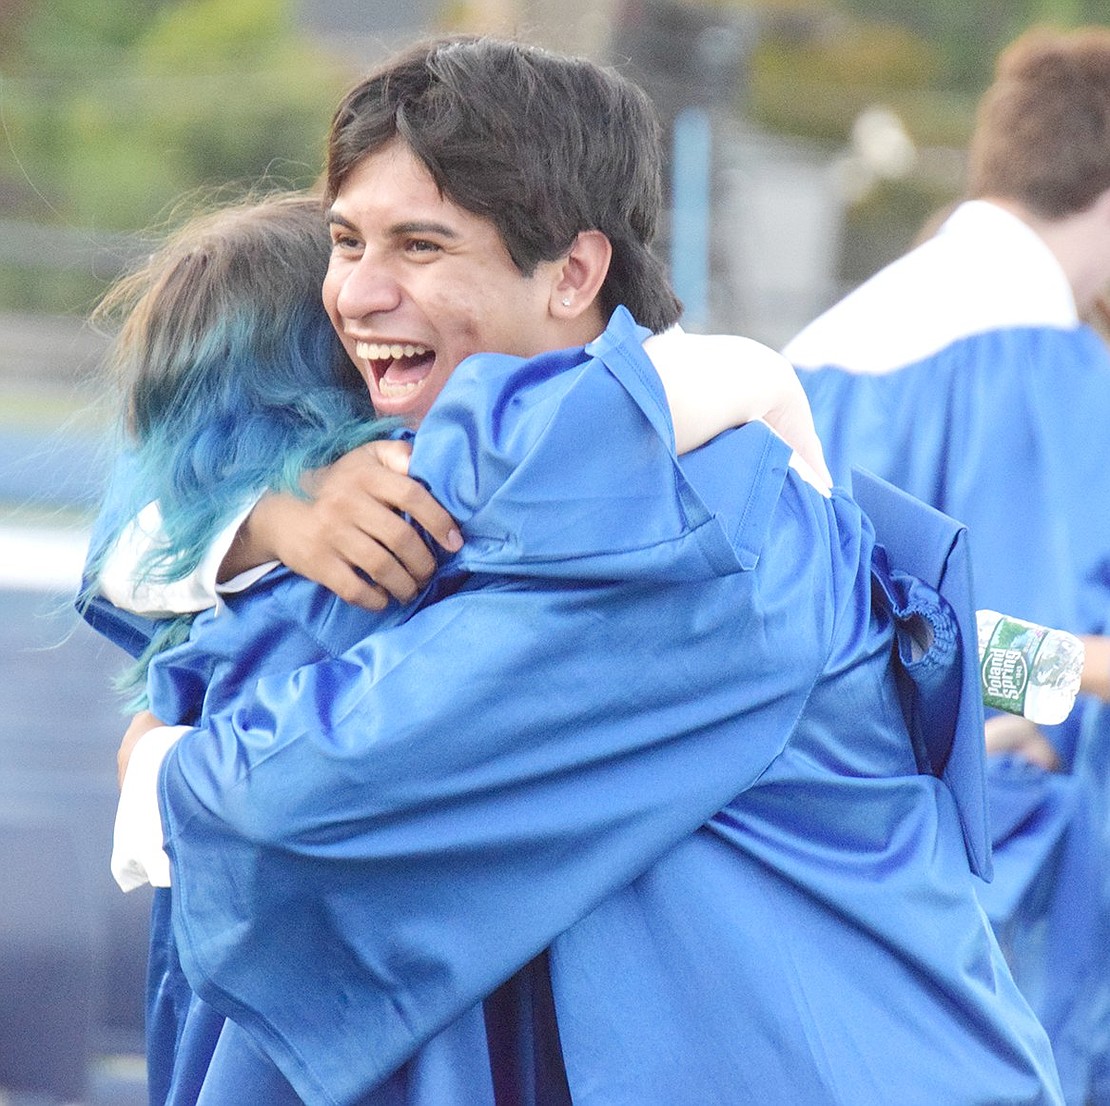 As soon as the Port Chester High School Class of 2022 commencement ceremony concludes, Darian Sanchez embraces a classmate with an expression of pure joy plastered across his face.